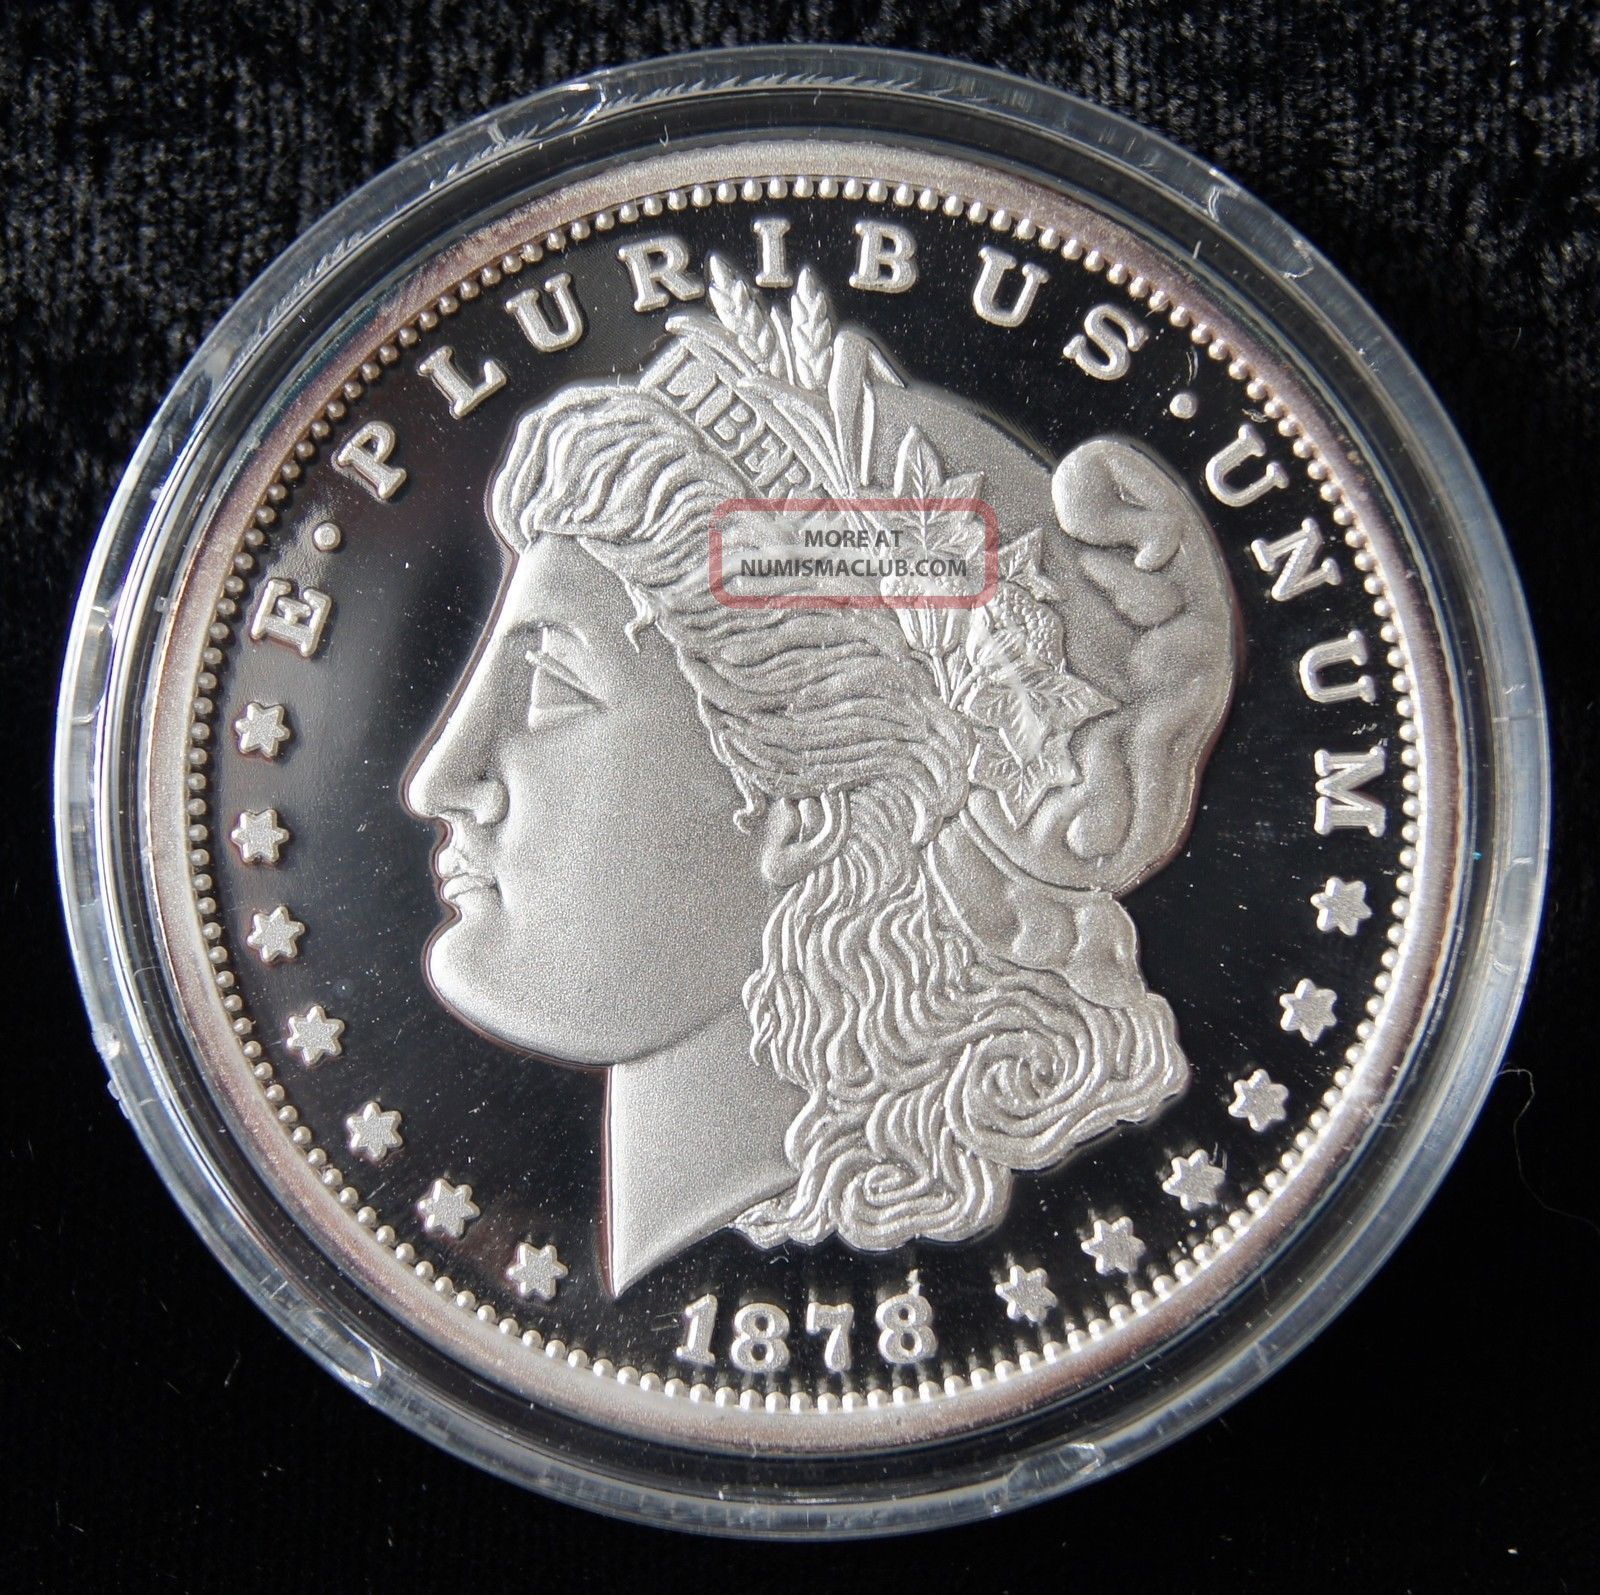 1878 1 Dollar 2oz. 999 Pure Silver Proof United States Coin (0516)